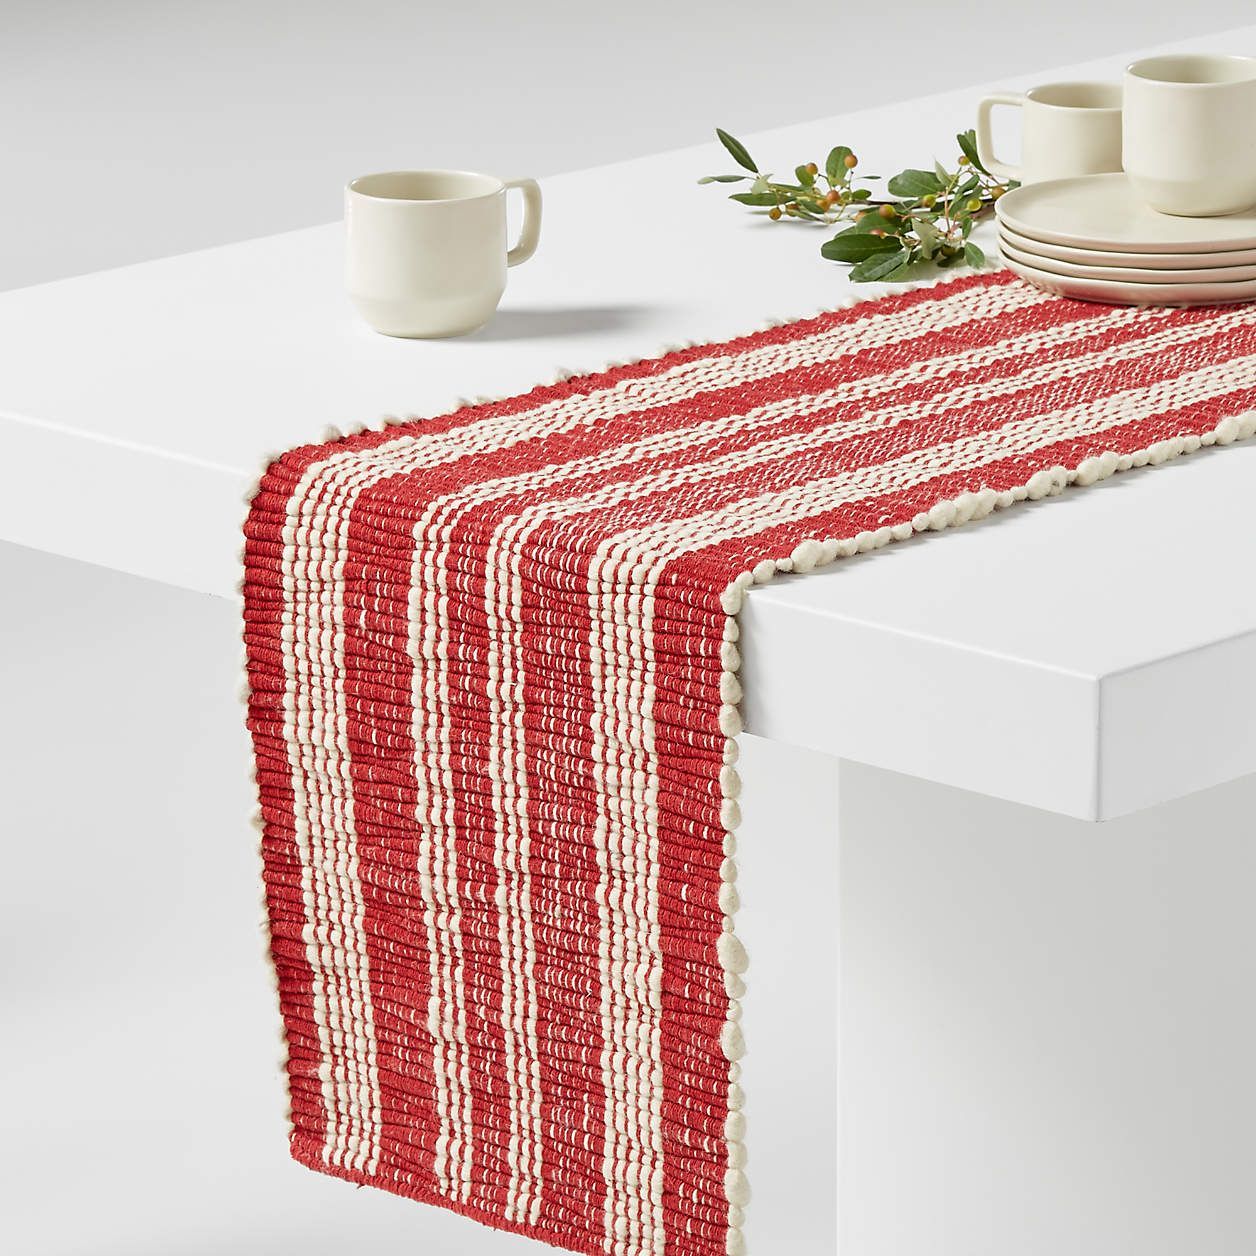 Details about   Table Decoration Christmas Table Fabric Printing Table Runner Table Cover Linen 